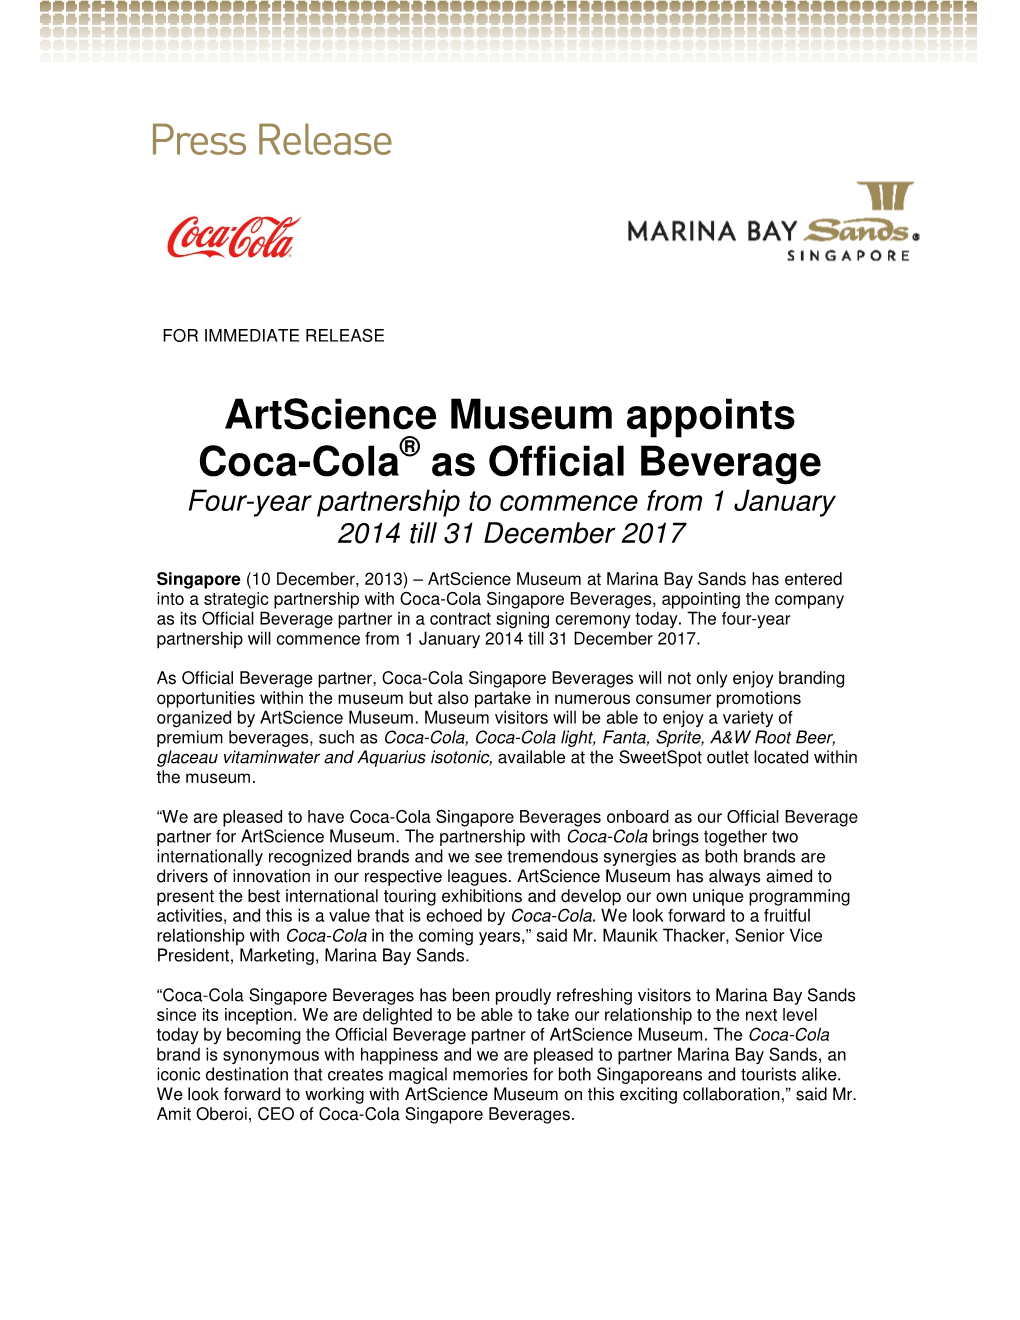 Artscience Museum Appoints Coca Cola Singapore As the Official Beverage